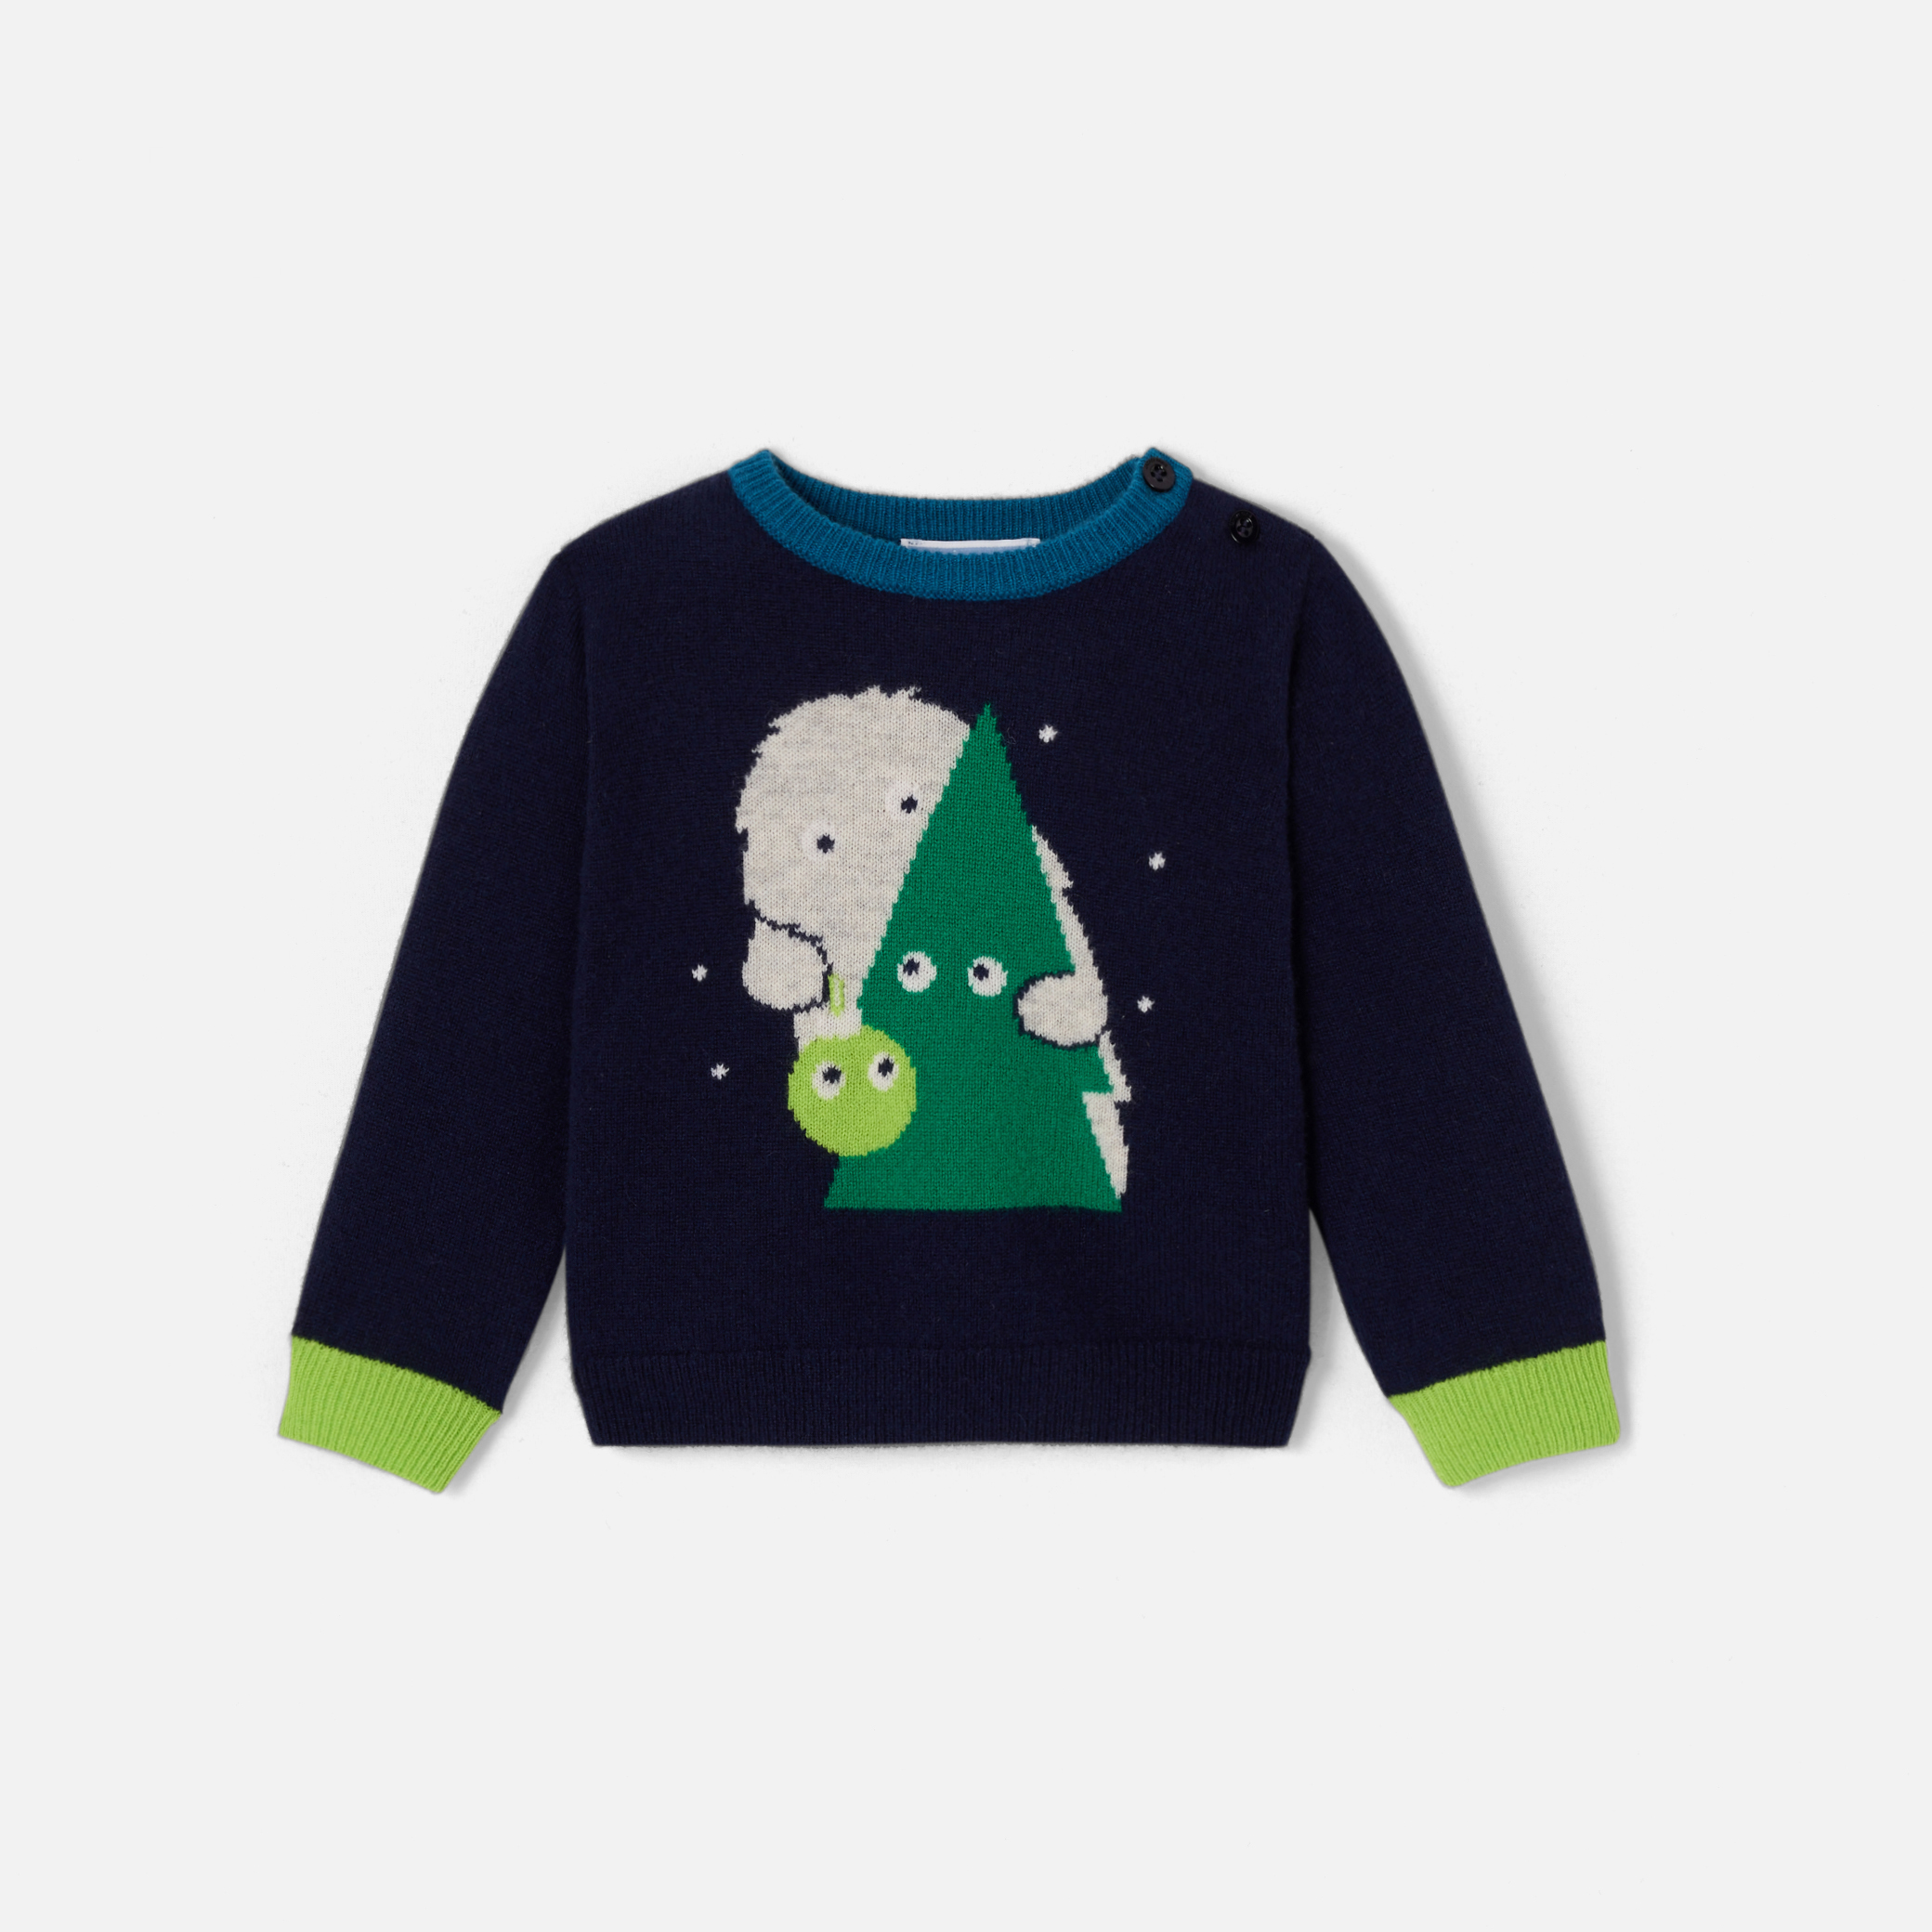 Baby boy cashmere Holiday sweater